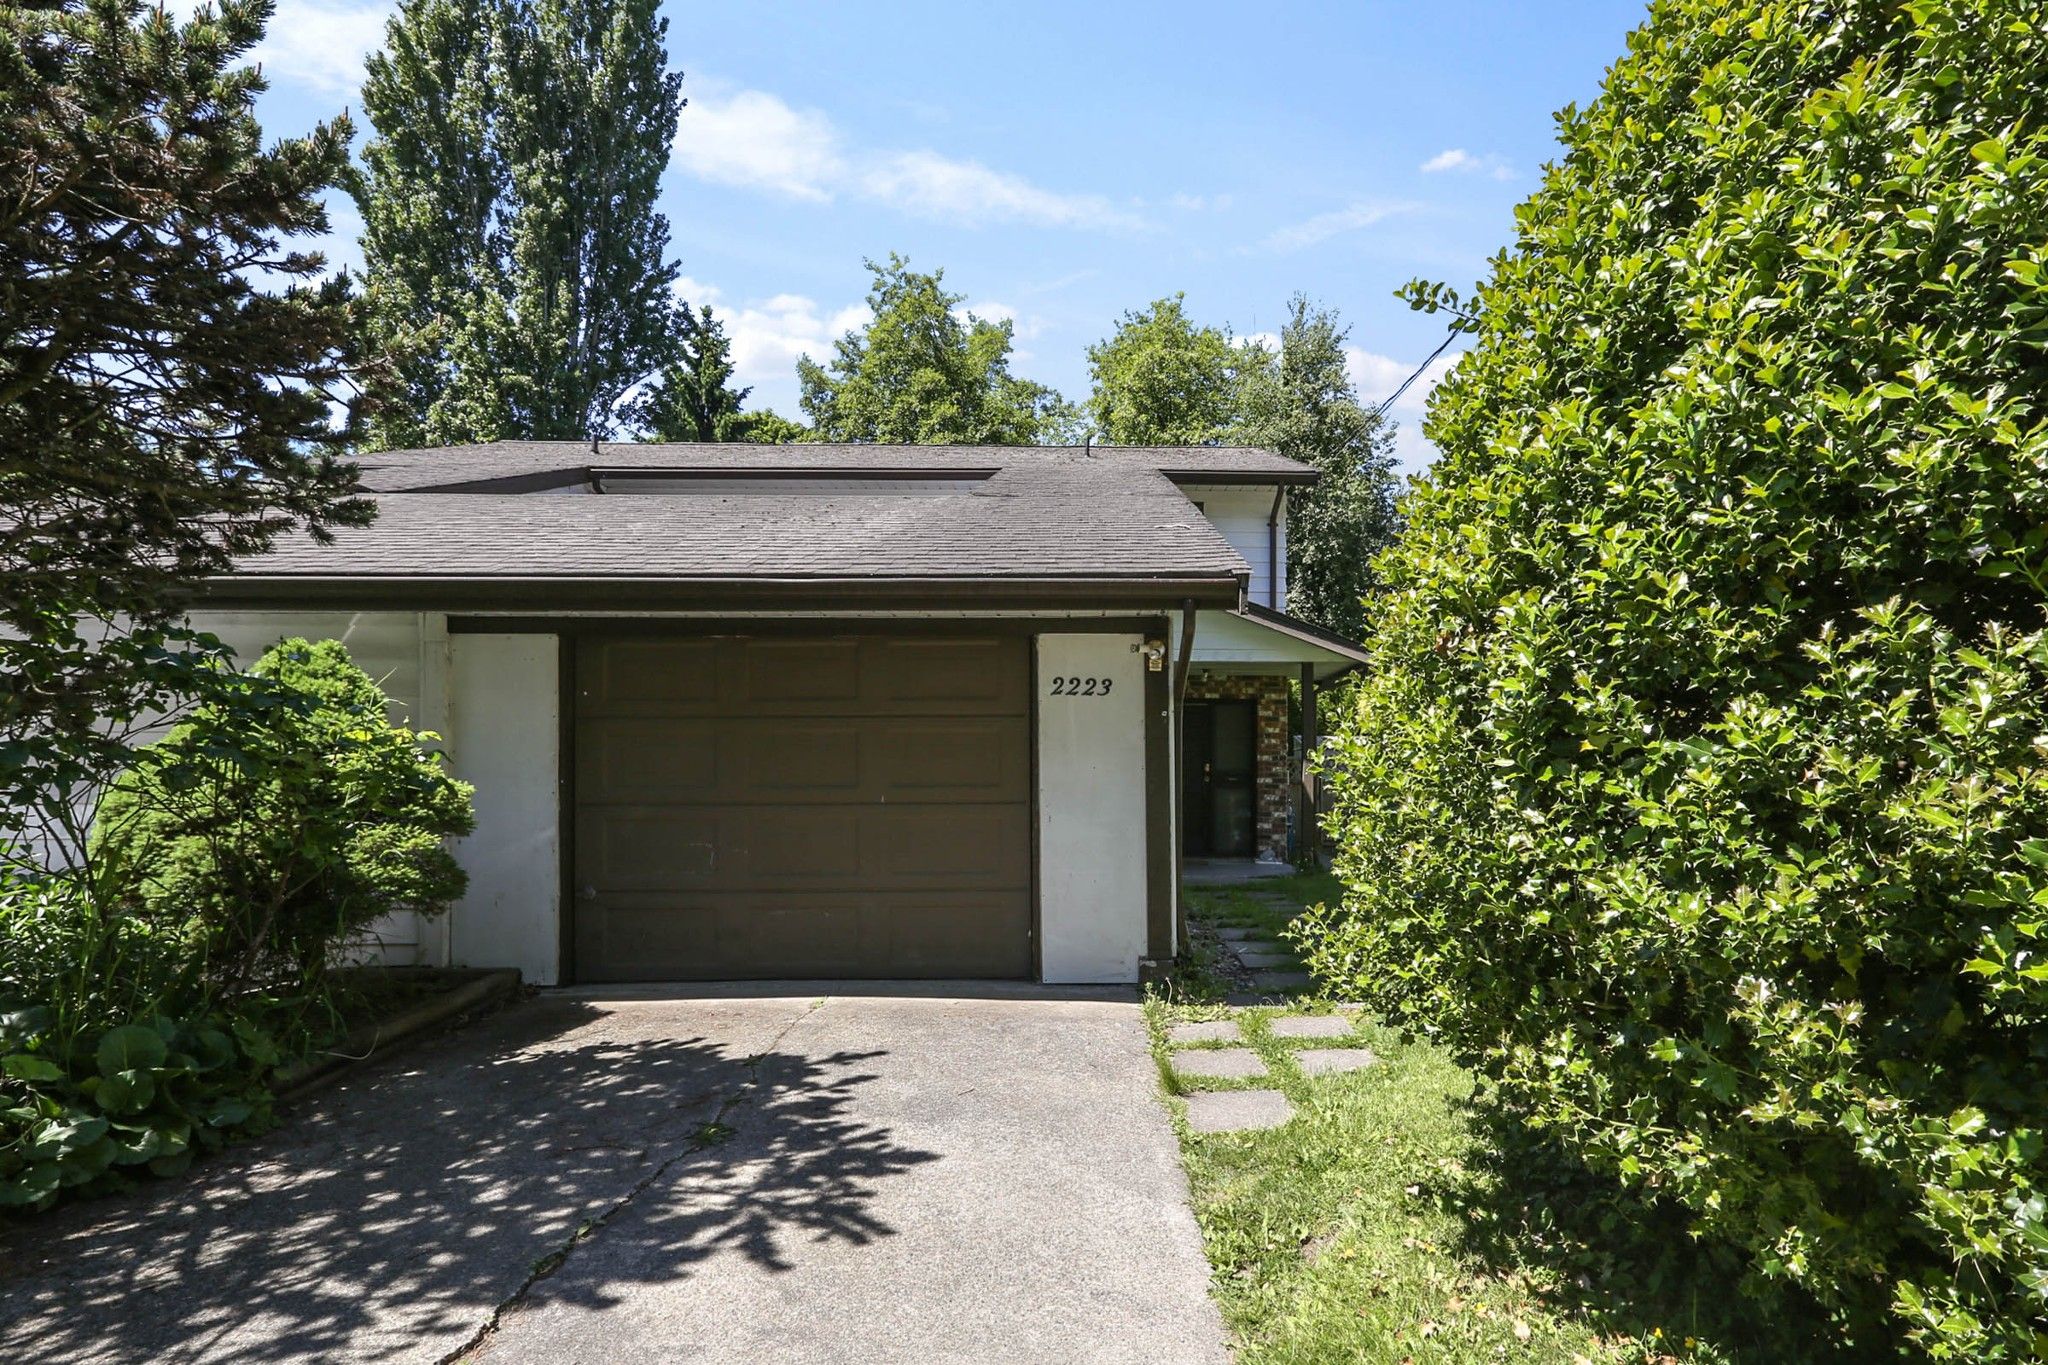 Main Photo: Map location: 2223 153 Street in Surrey: King George Corridor 1/2 Duplex for sale (South Surrey White Rock)  : MLS®# R2586651